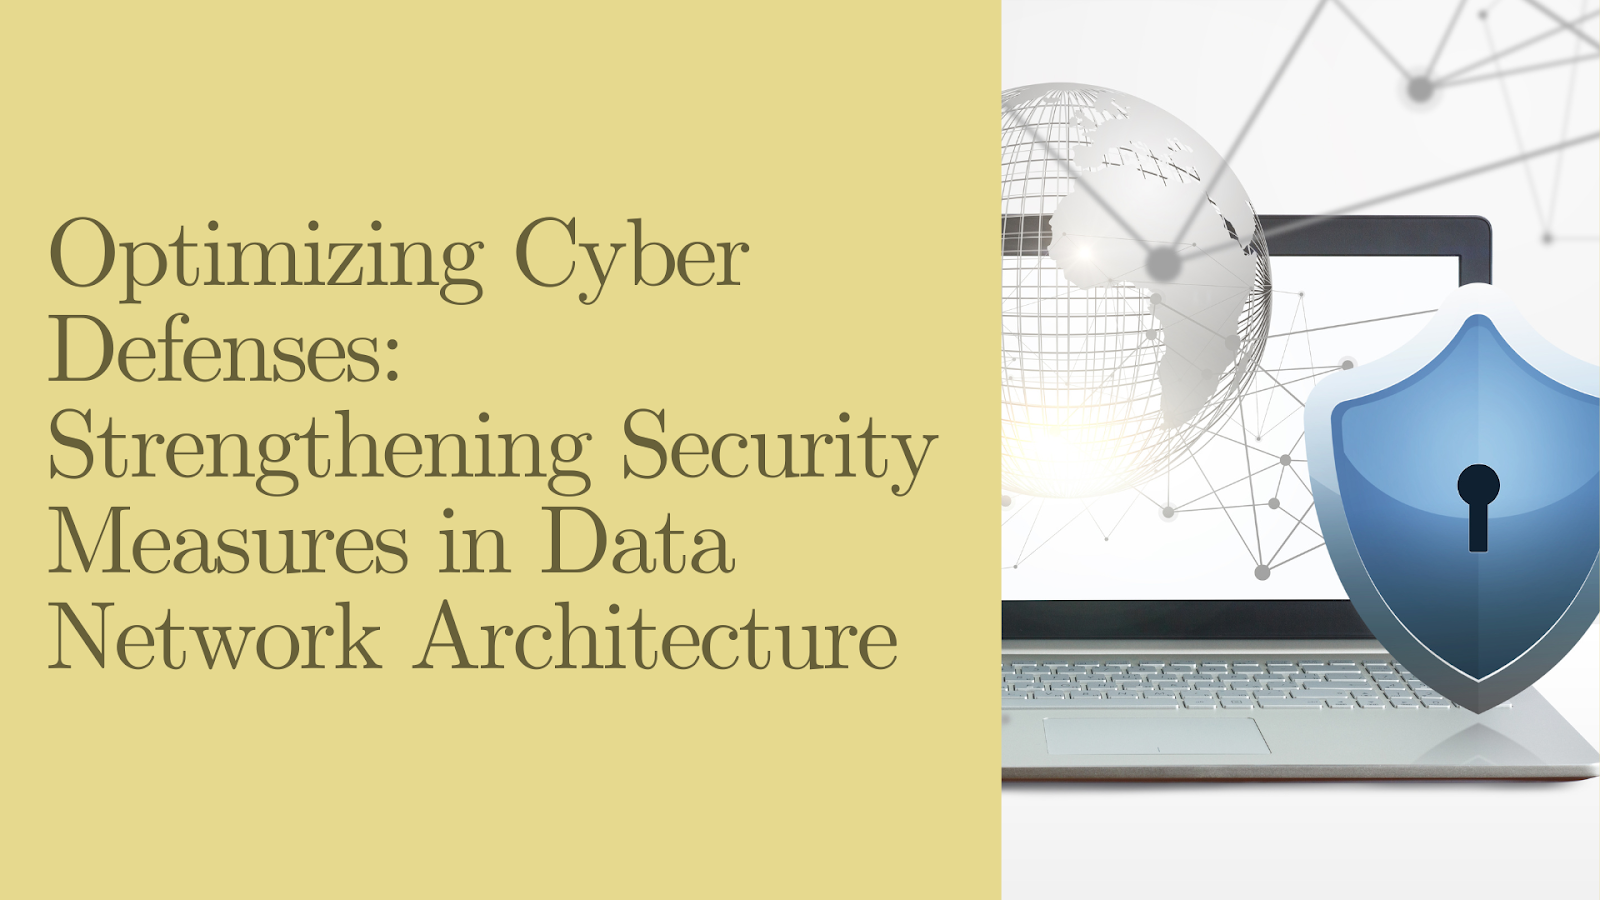 Optimizing Cyber Defenses: Strengthening Security Measures in Data Network Architecture 